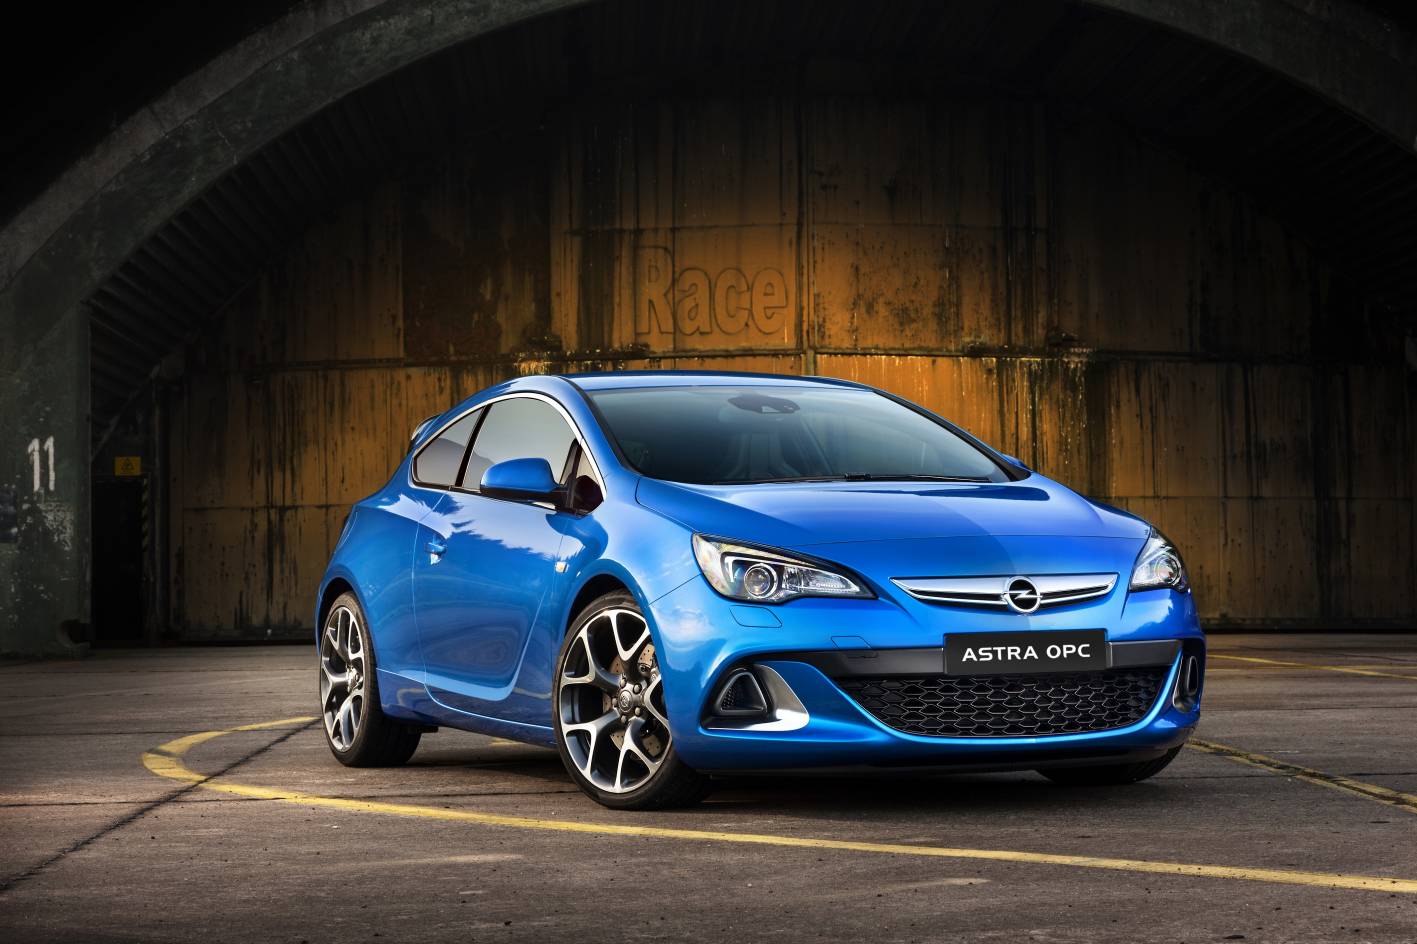 Opel's Extreme OPC has over 224kW